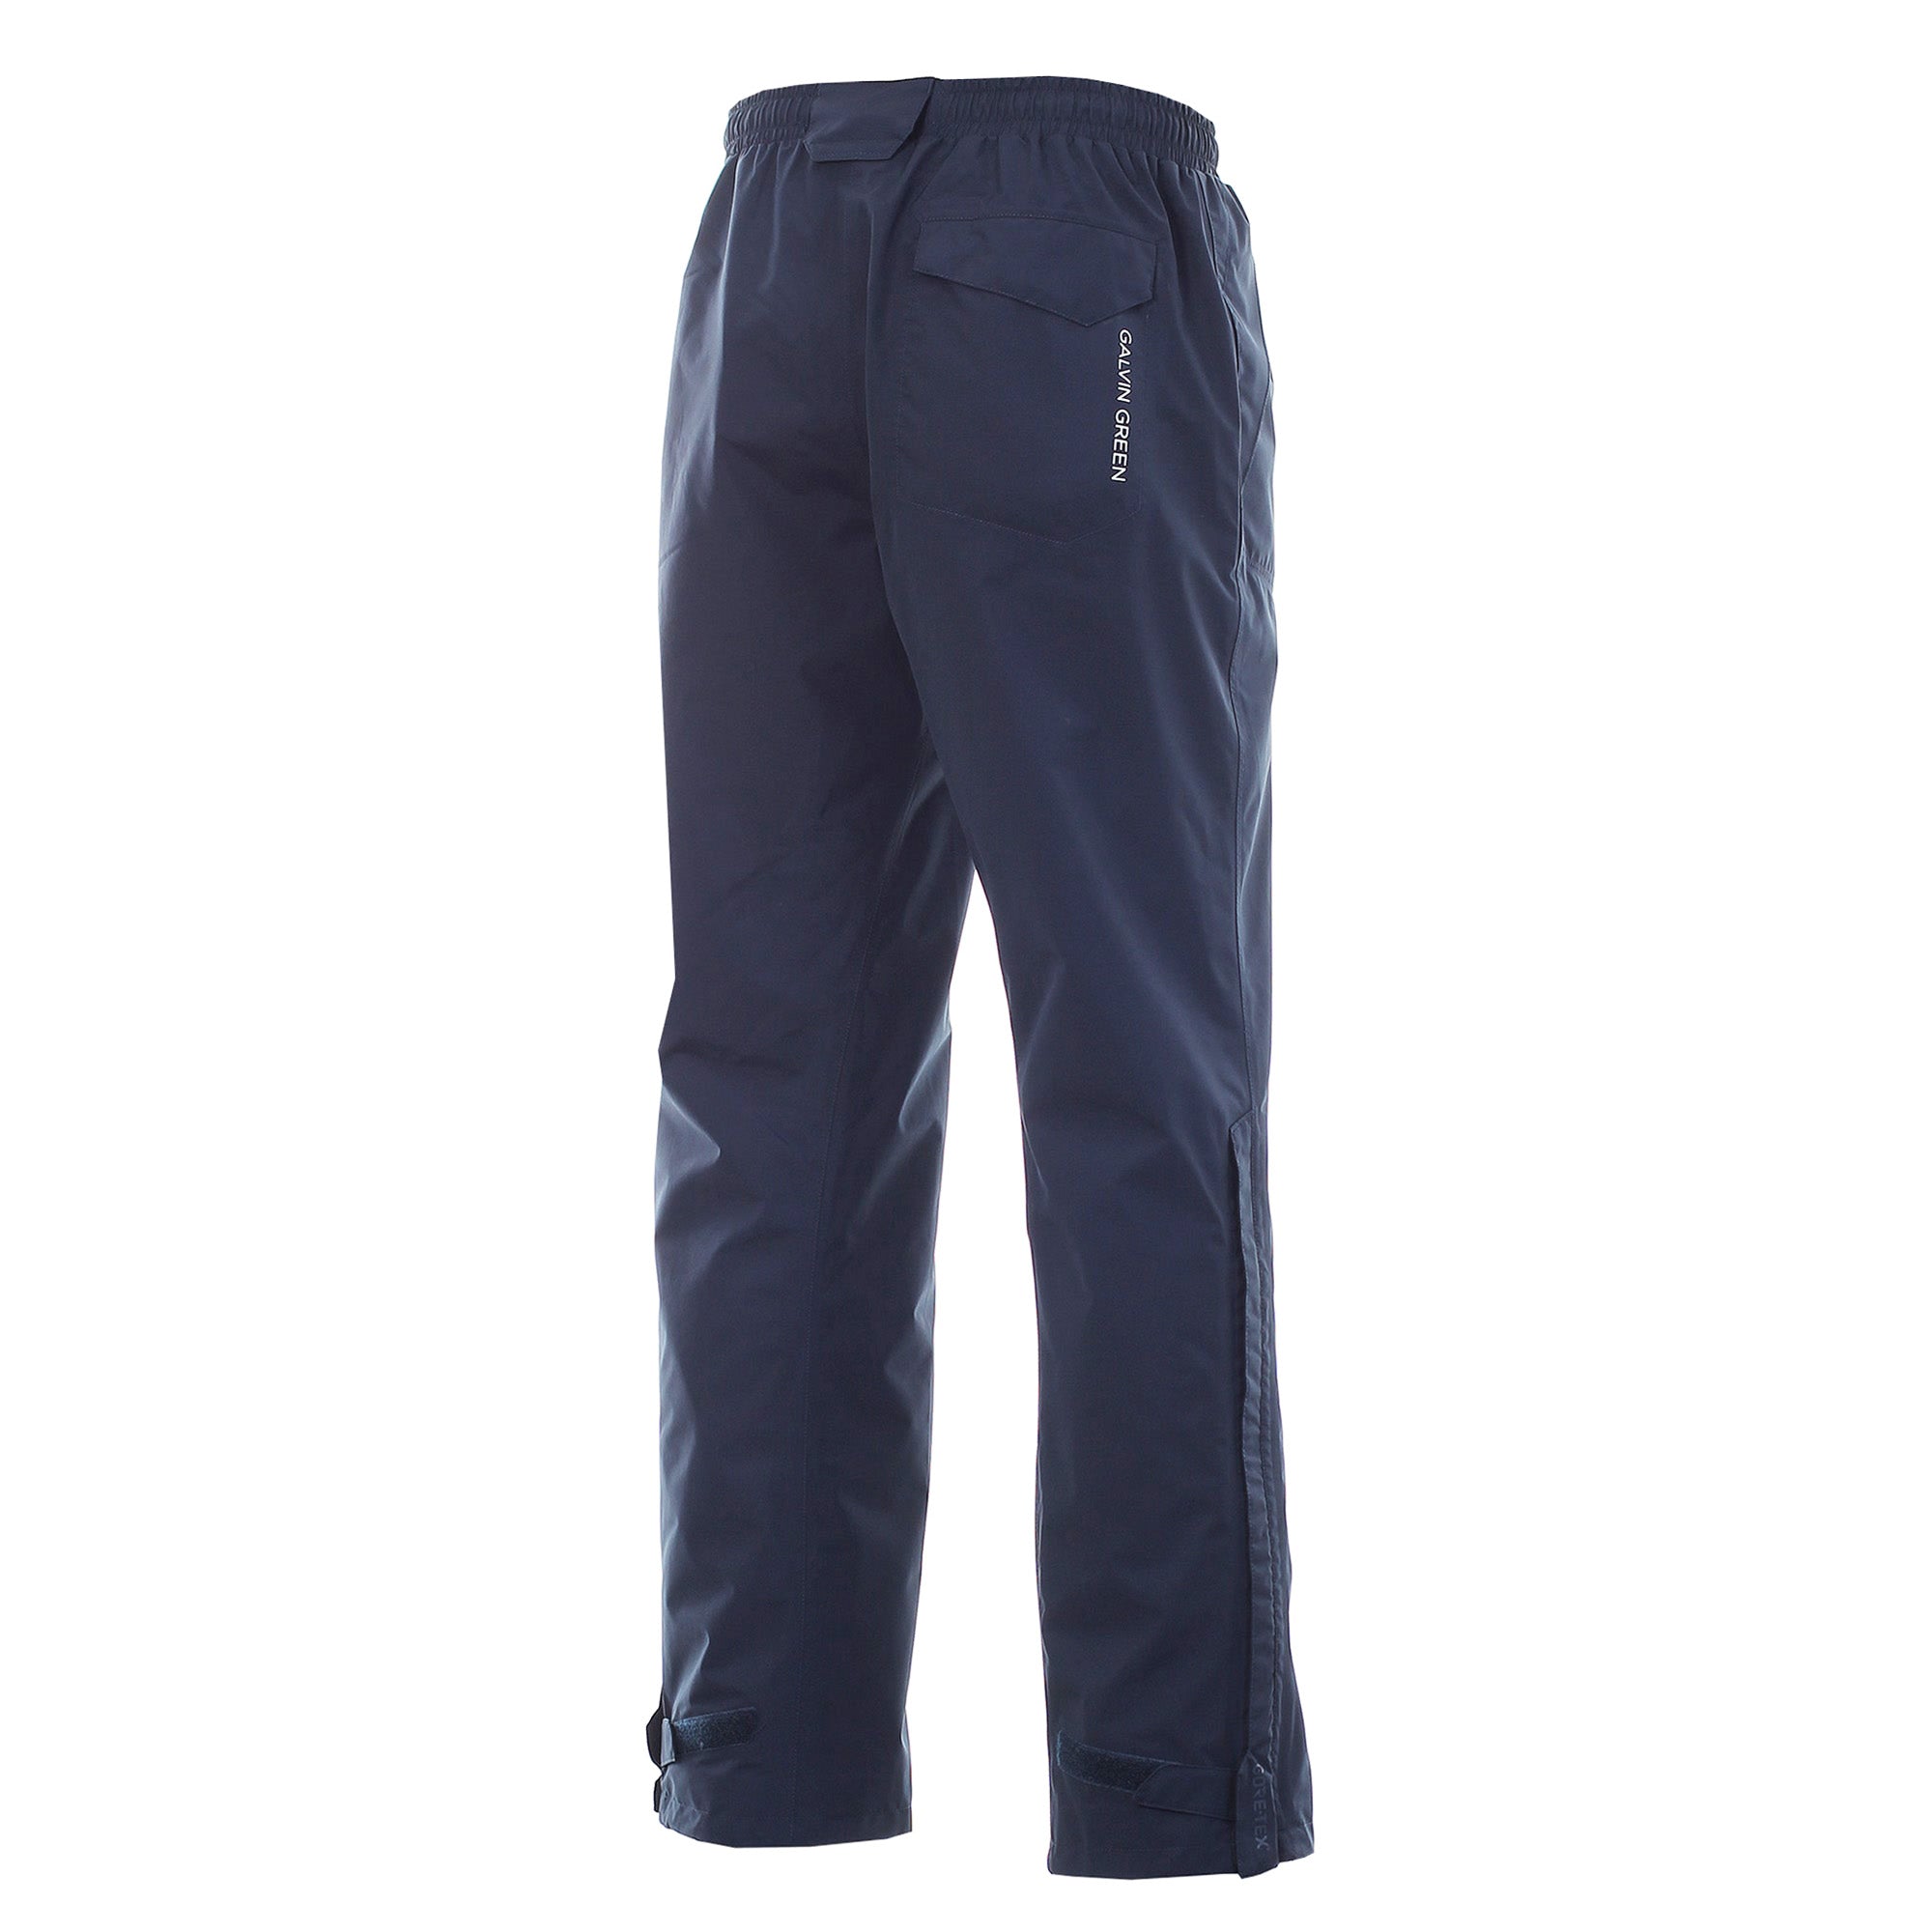 galvin-green-andy-gore-tex-waterproof-golf-trousers-navy